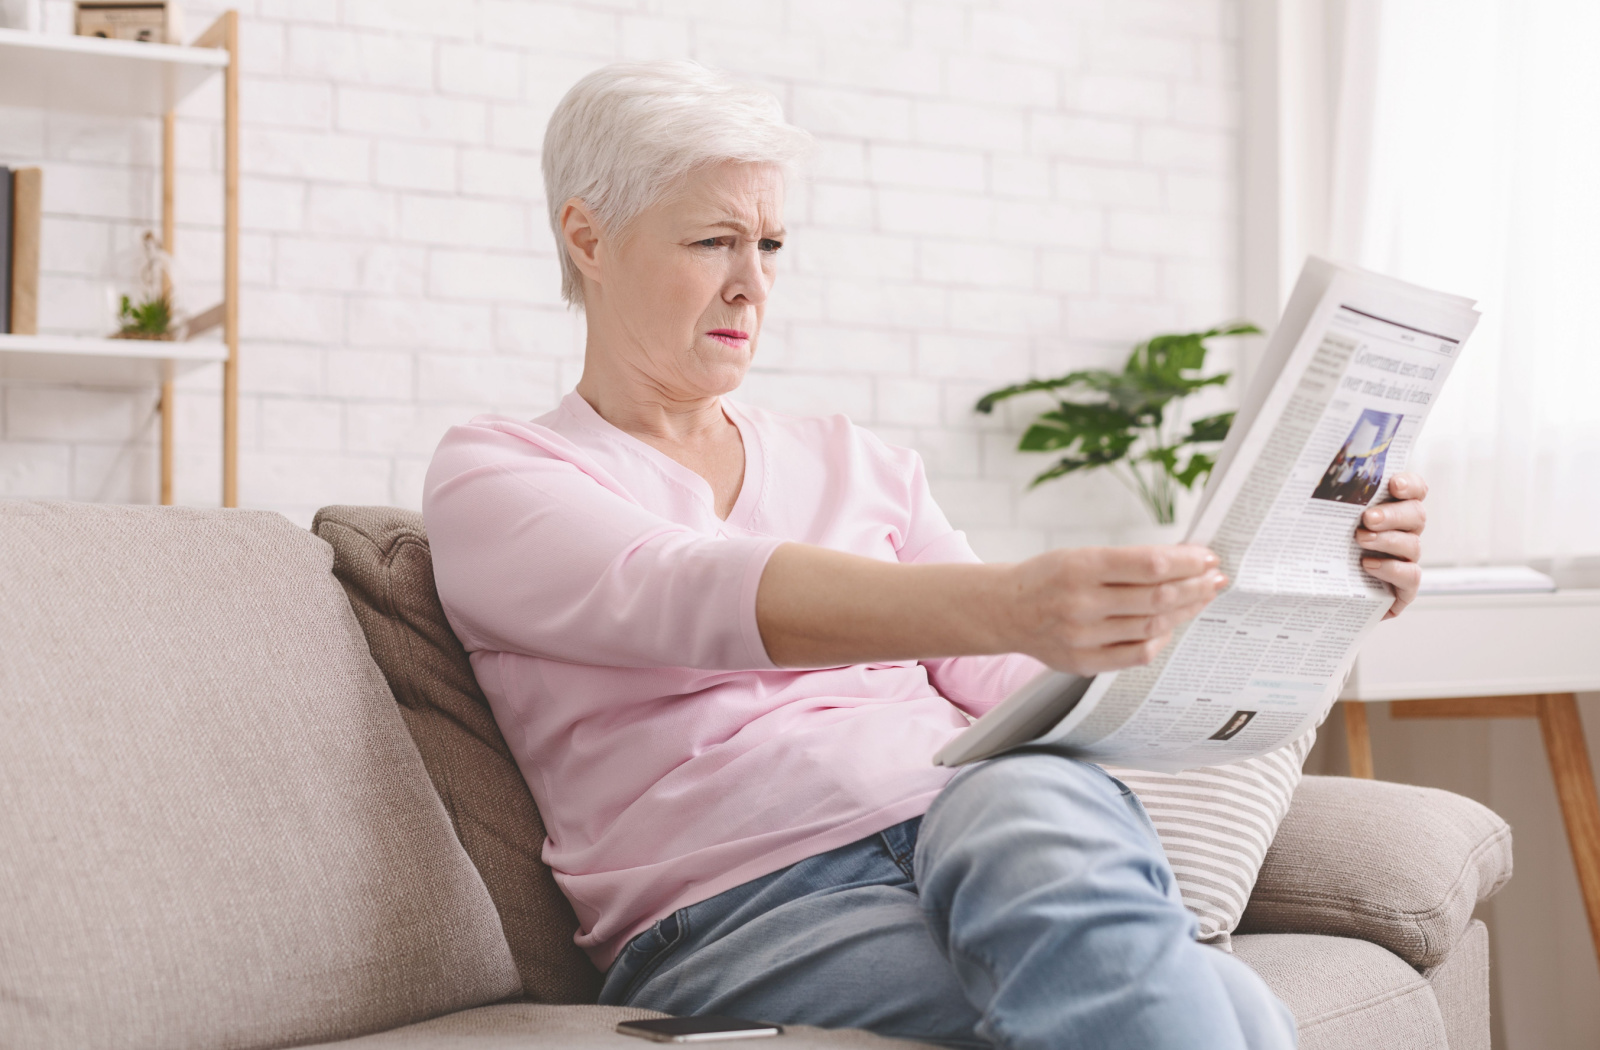 Mature woman holding a newspaper further away from herself to be able to read it.